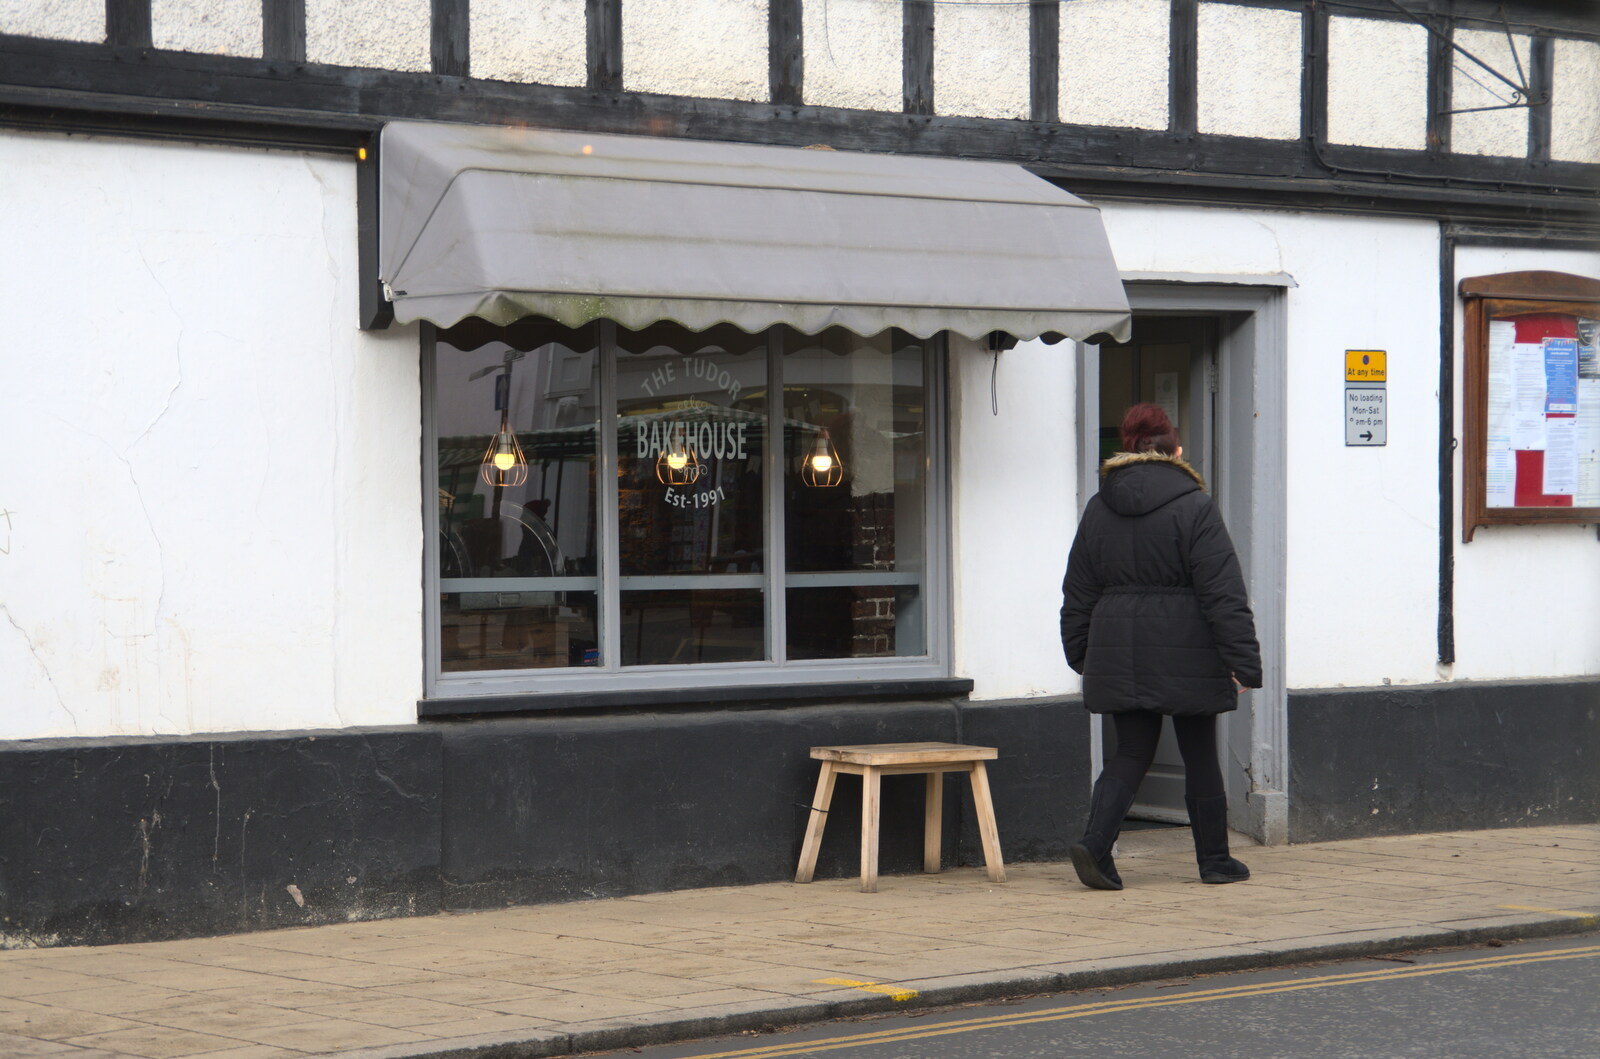 Lunch in Harleston, Norfolk - 1st March 2023: The Tudor Bakehouse isn't exactly well signed